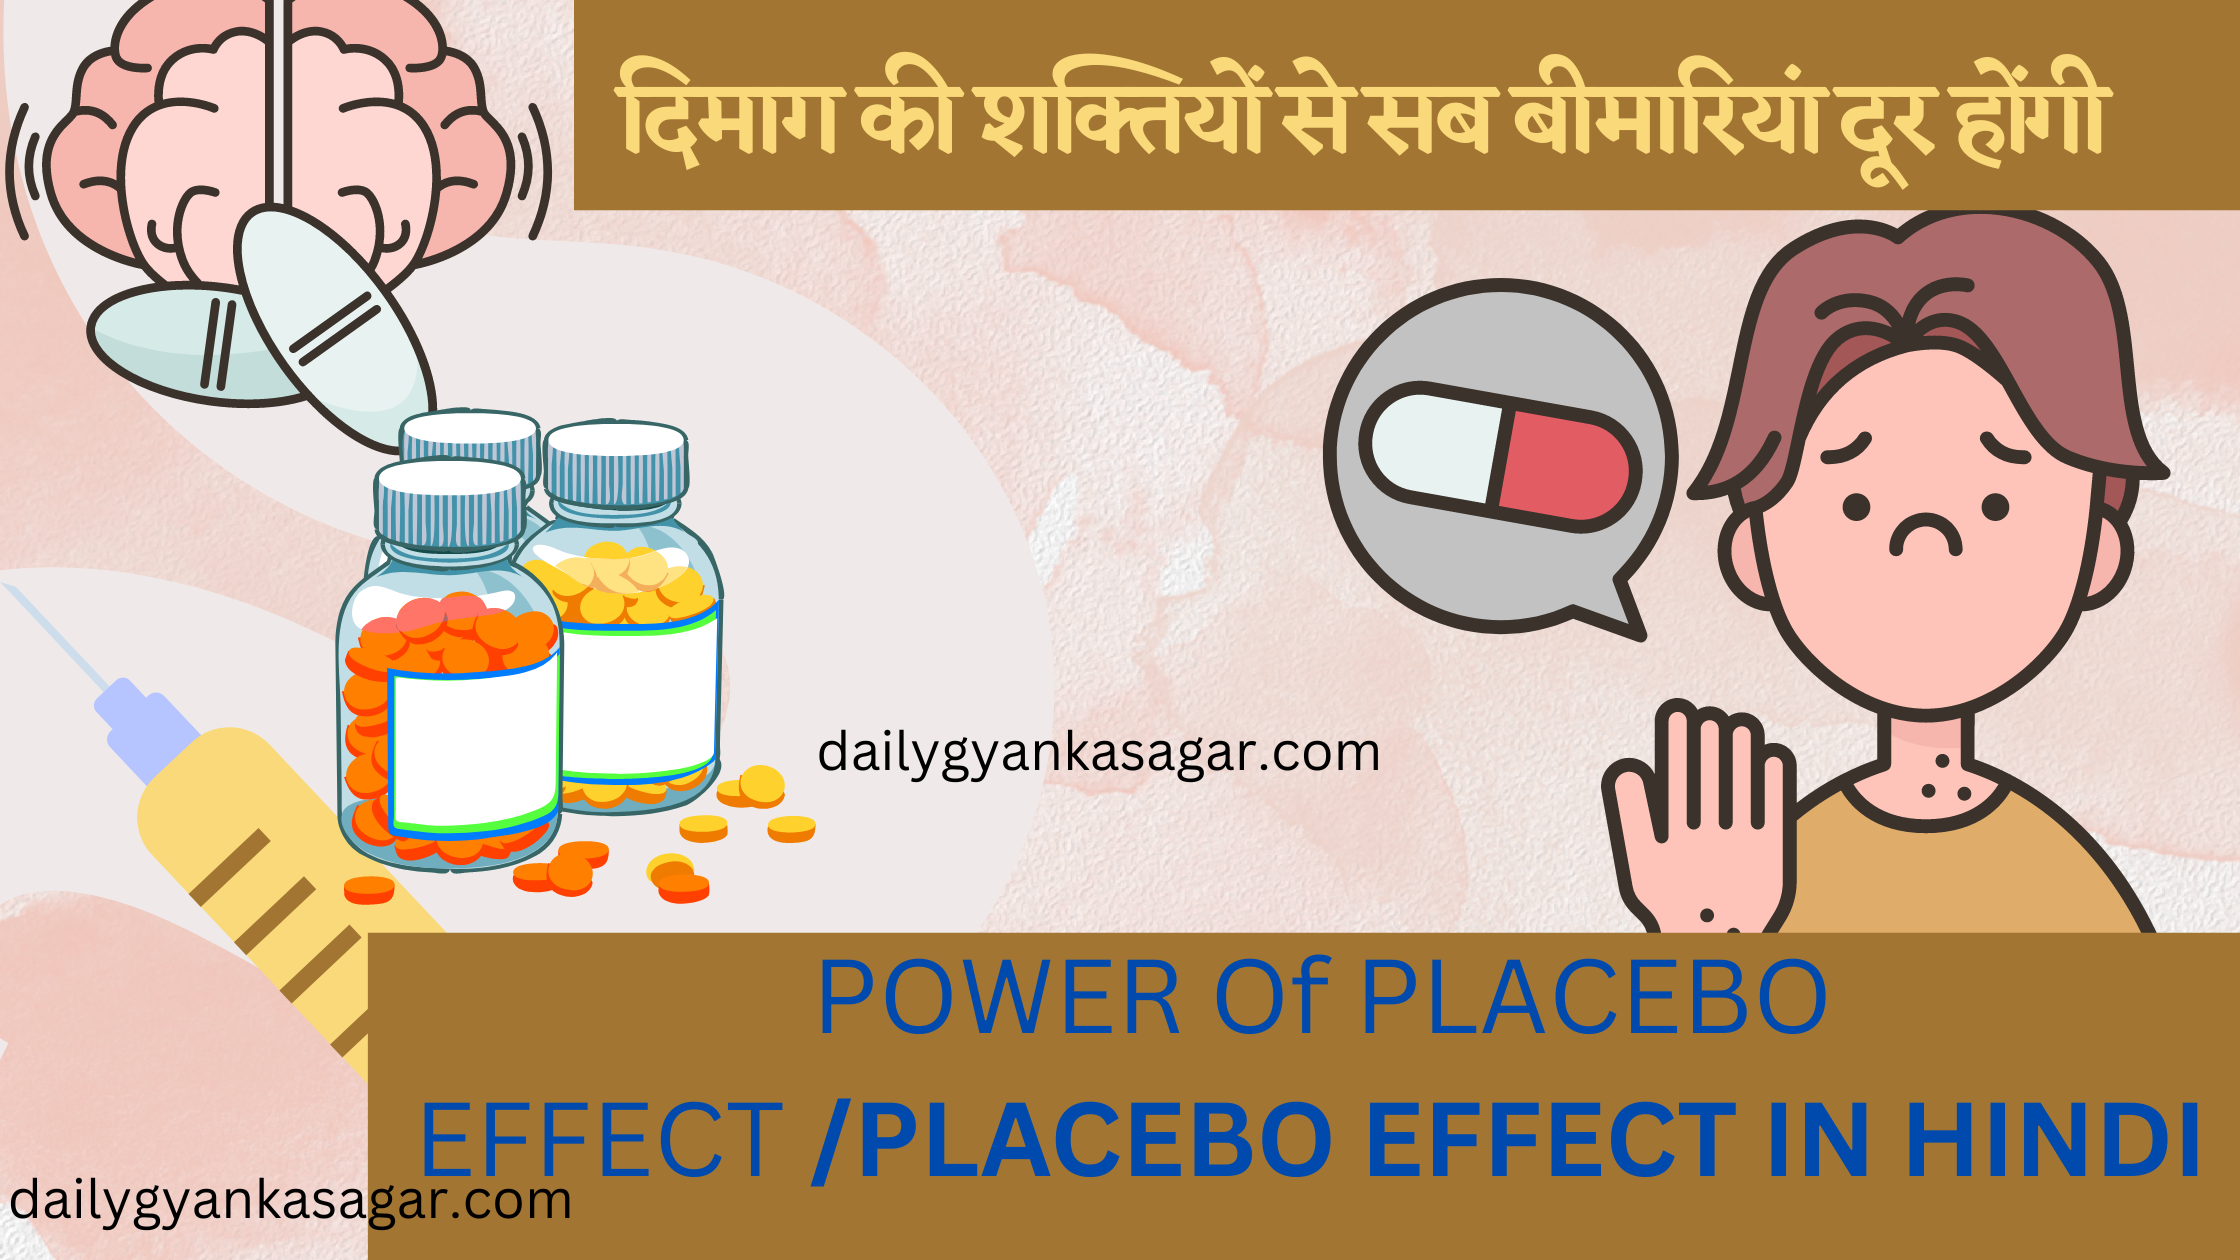 Power of Placebo effect/Placebo effect in hindi